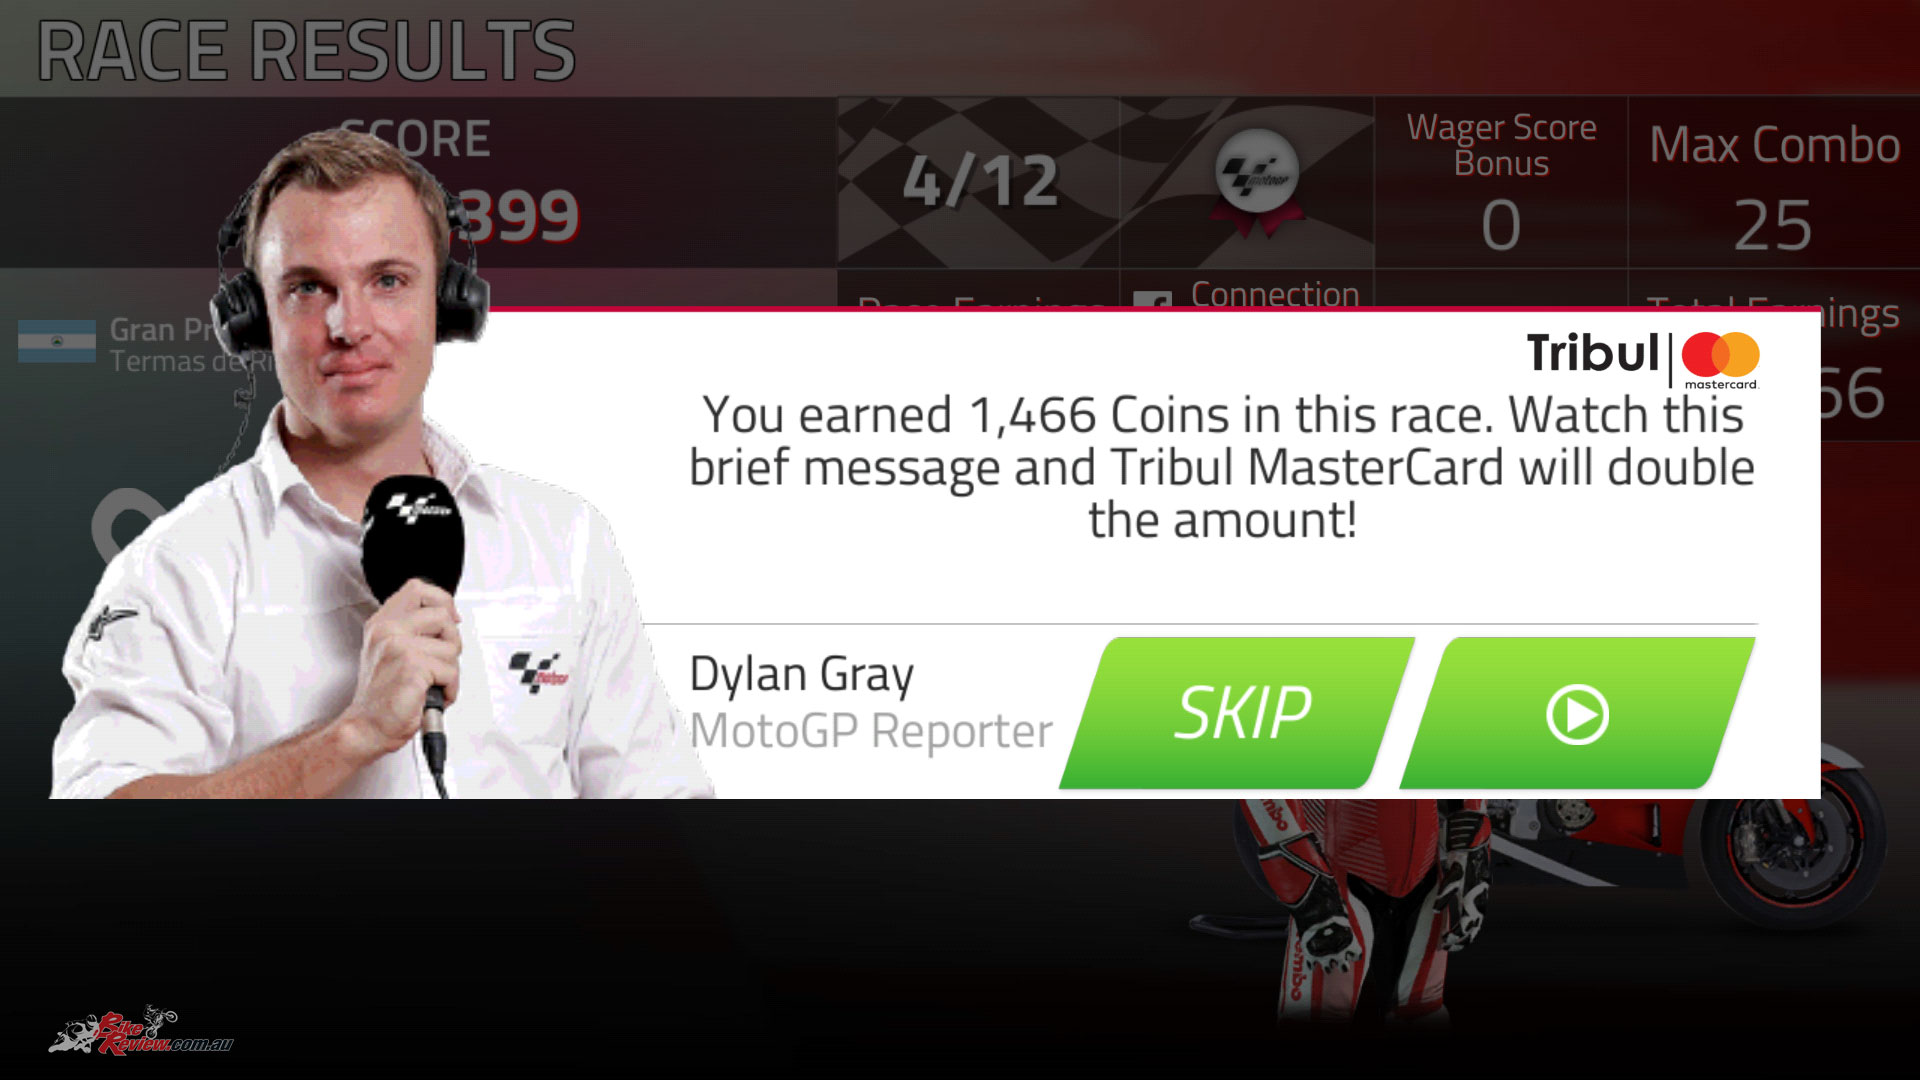 Post-race coins reward, with the option to watch an advertisement to double your winnings. All the advertisements I saw were for gambling apps, which is a bit of a shame in my opinion.